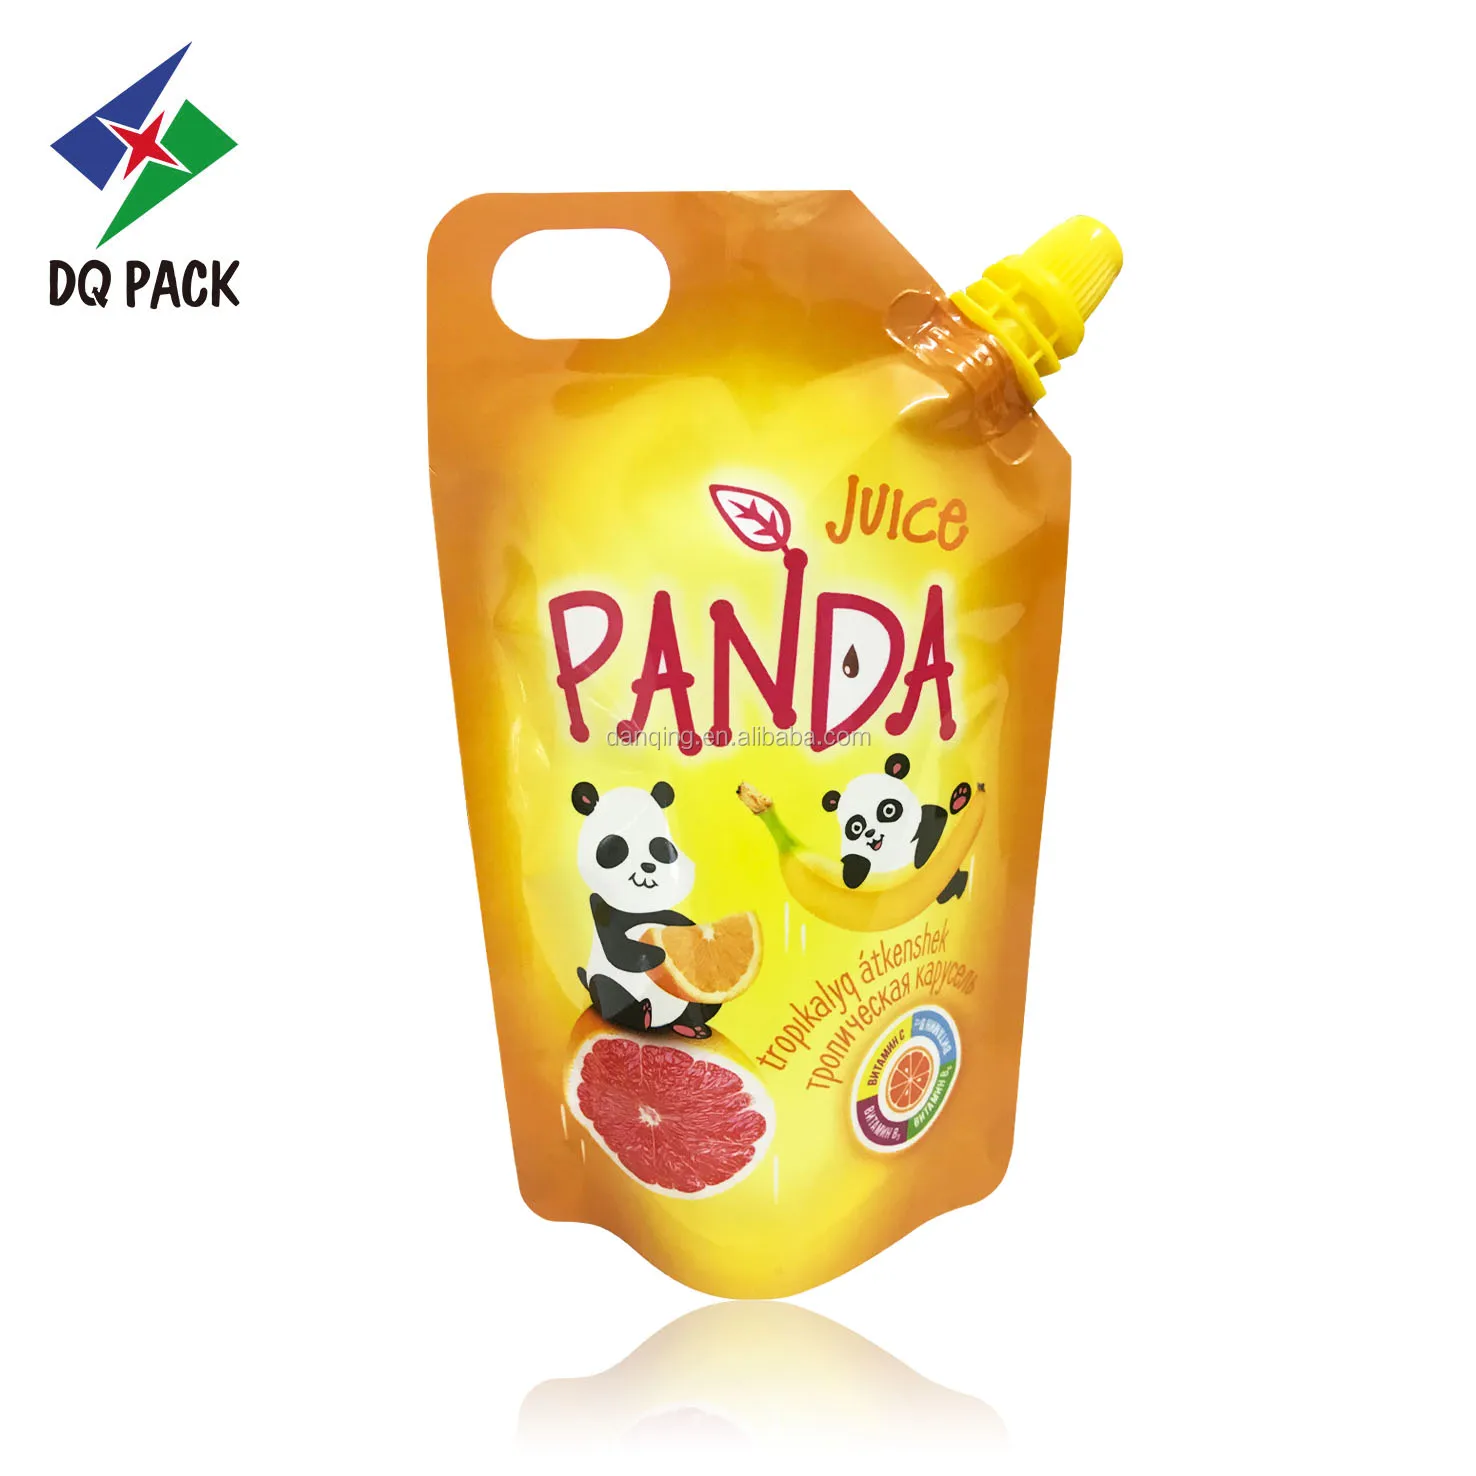 DQ PACK juice doypack with corner spout and handle